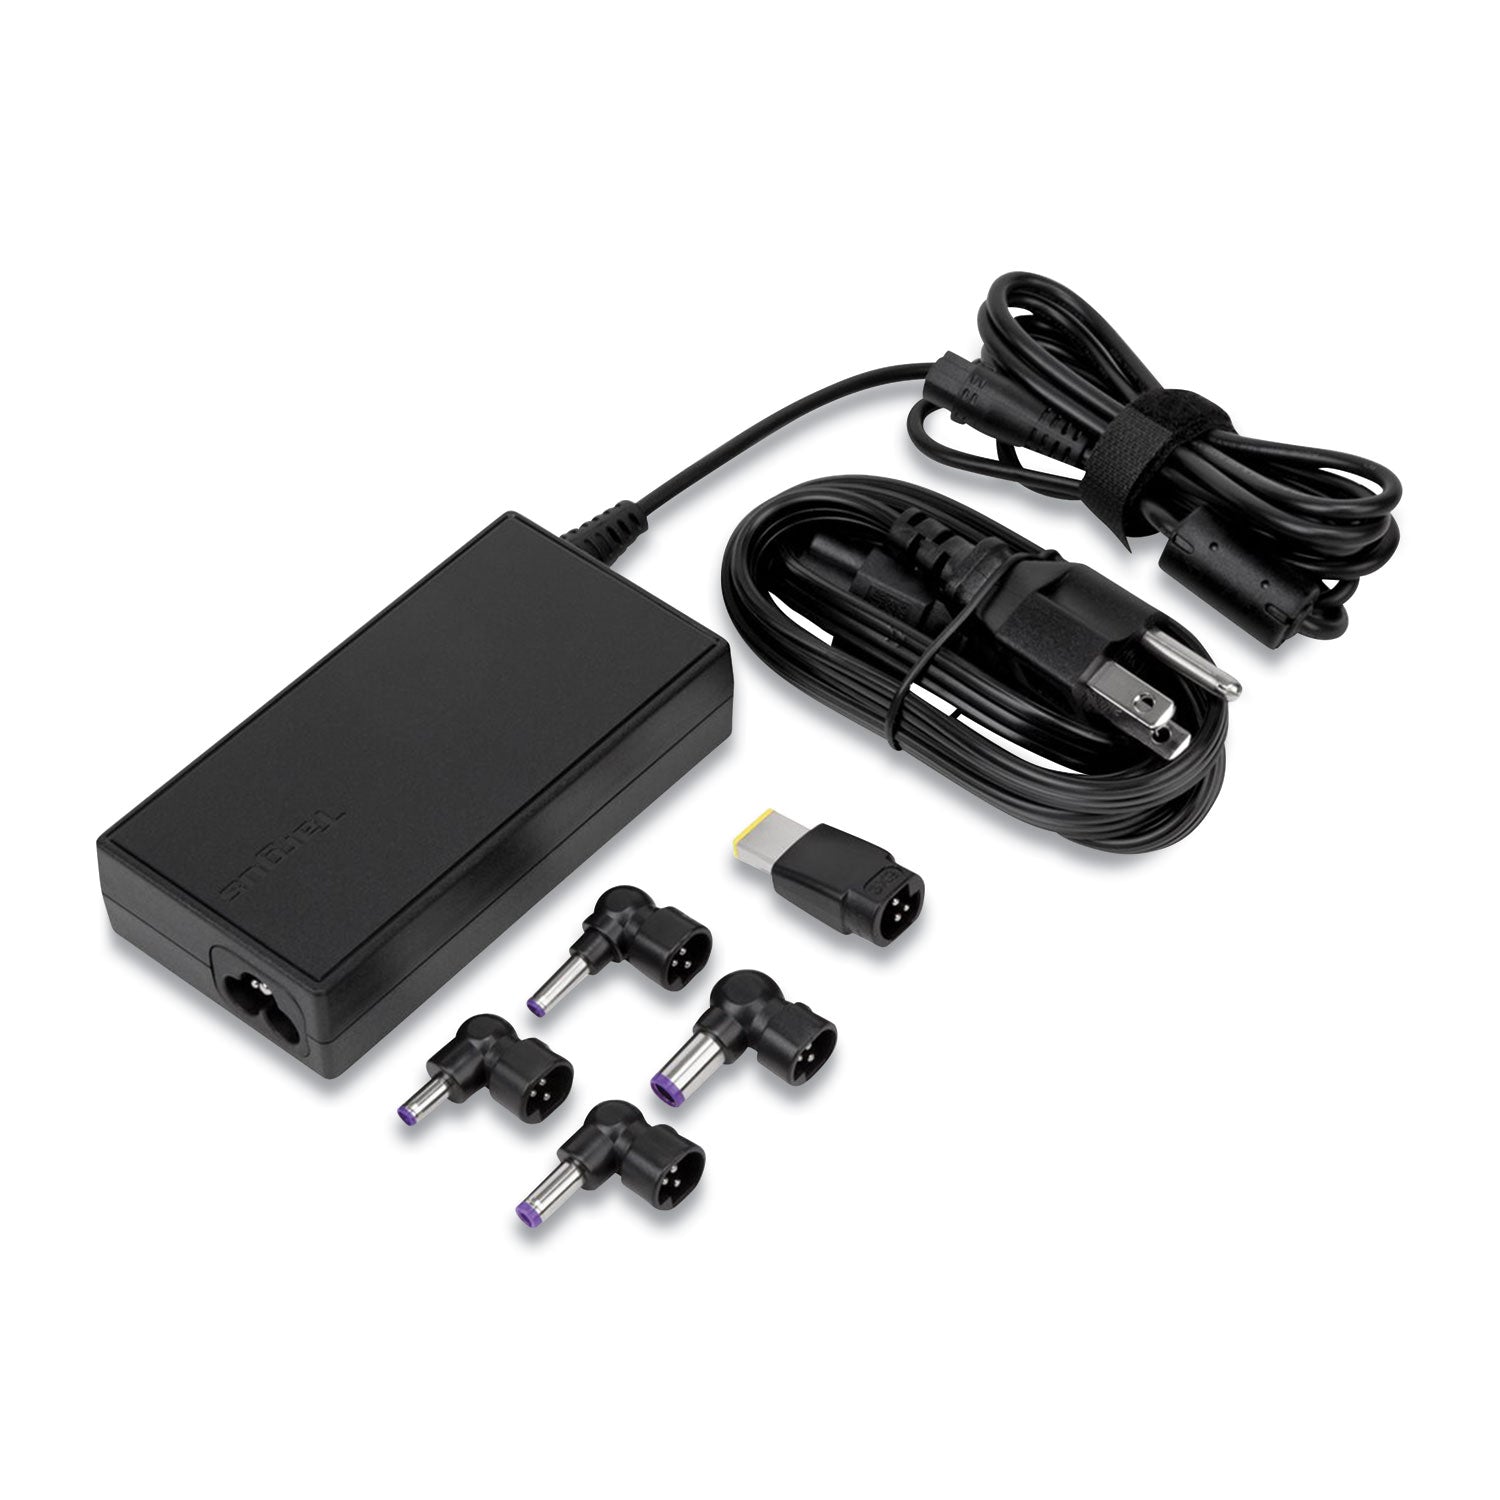 semi-slim-laptop-charger-for-various-devices-90-w-black_trgapa90us - 1